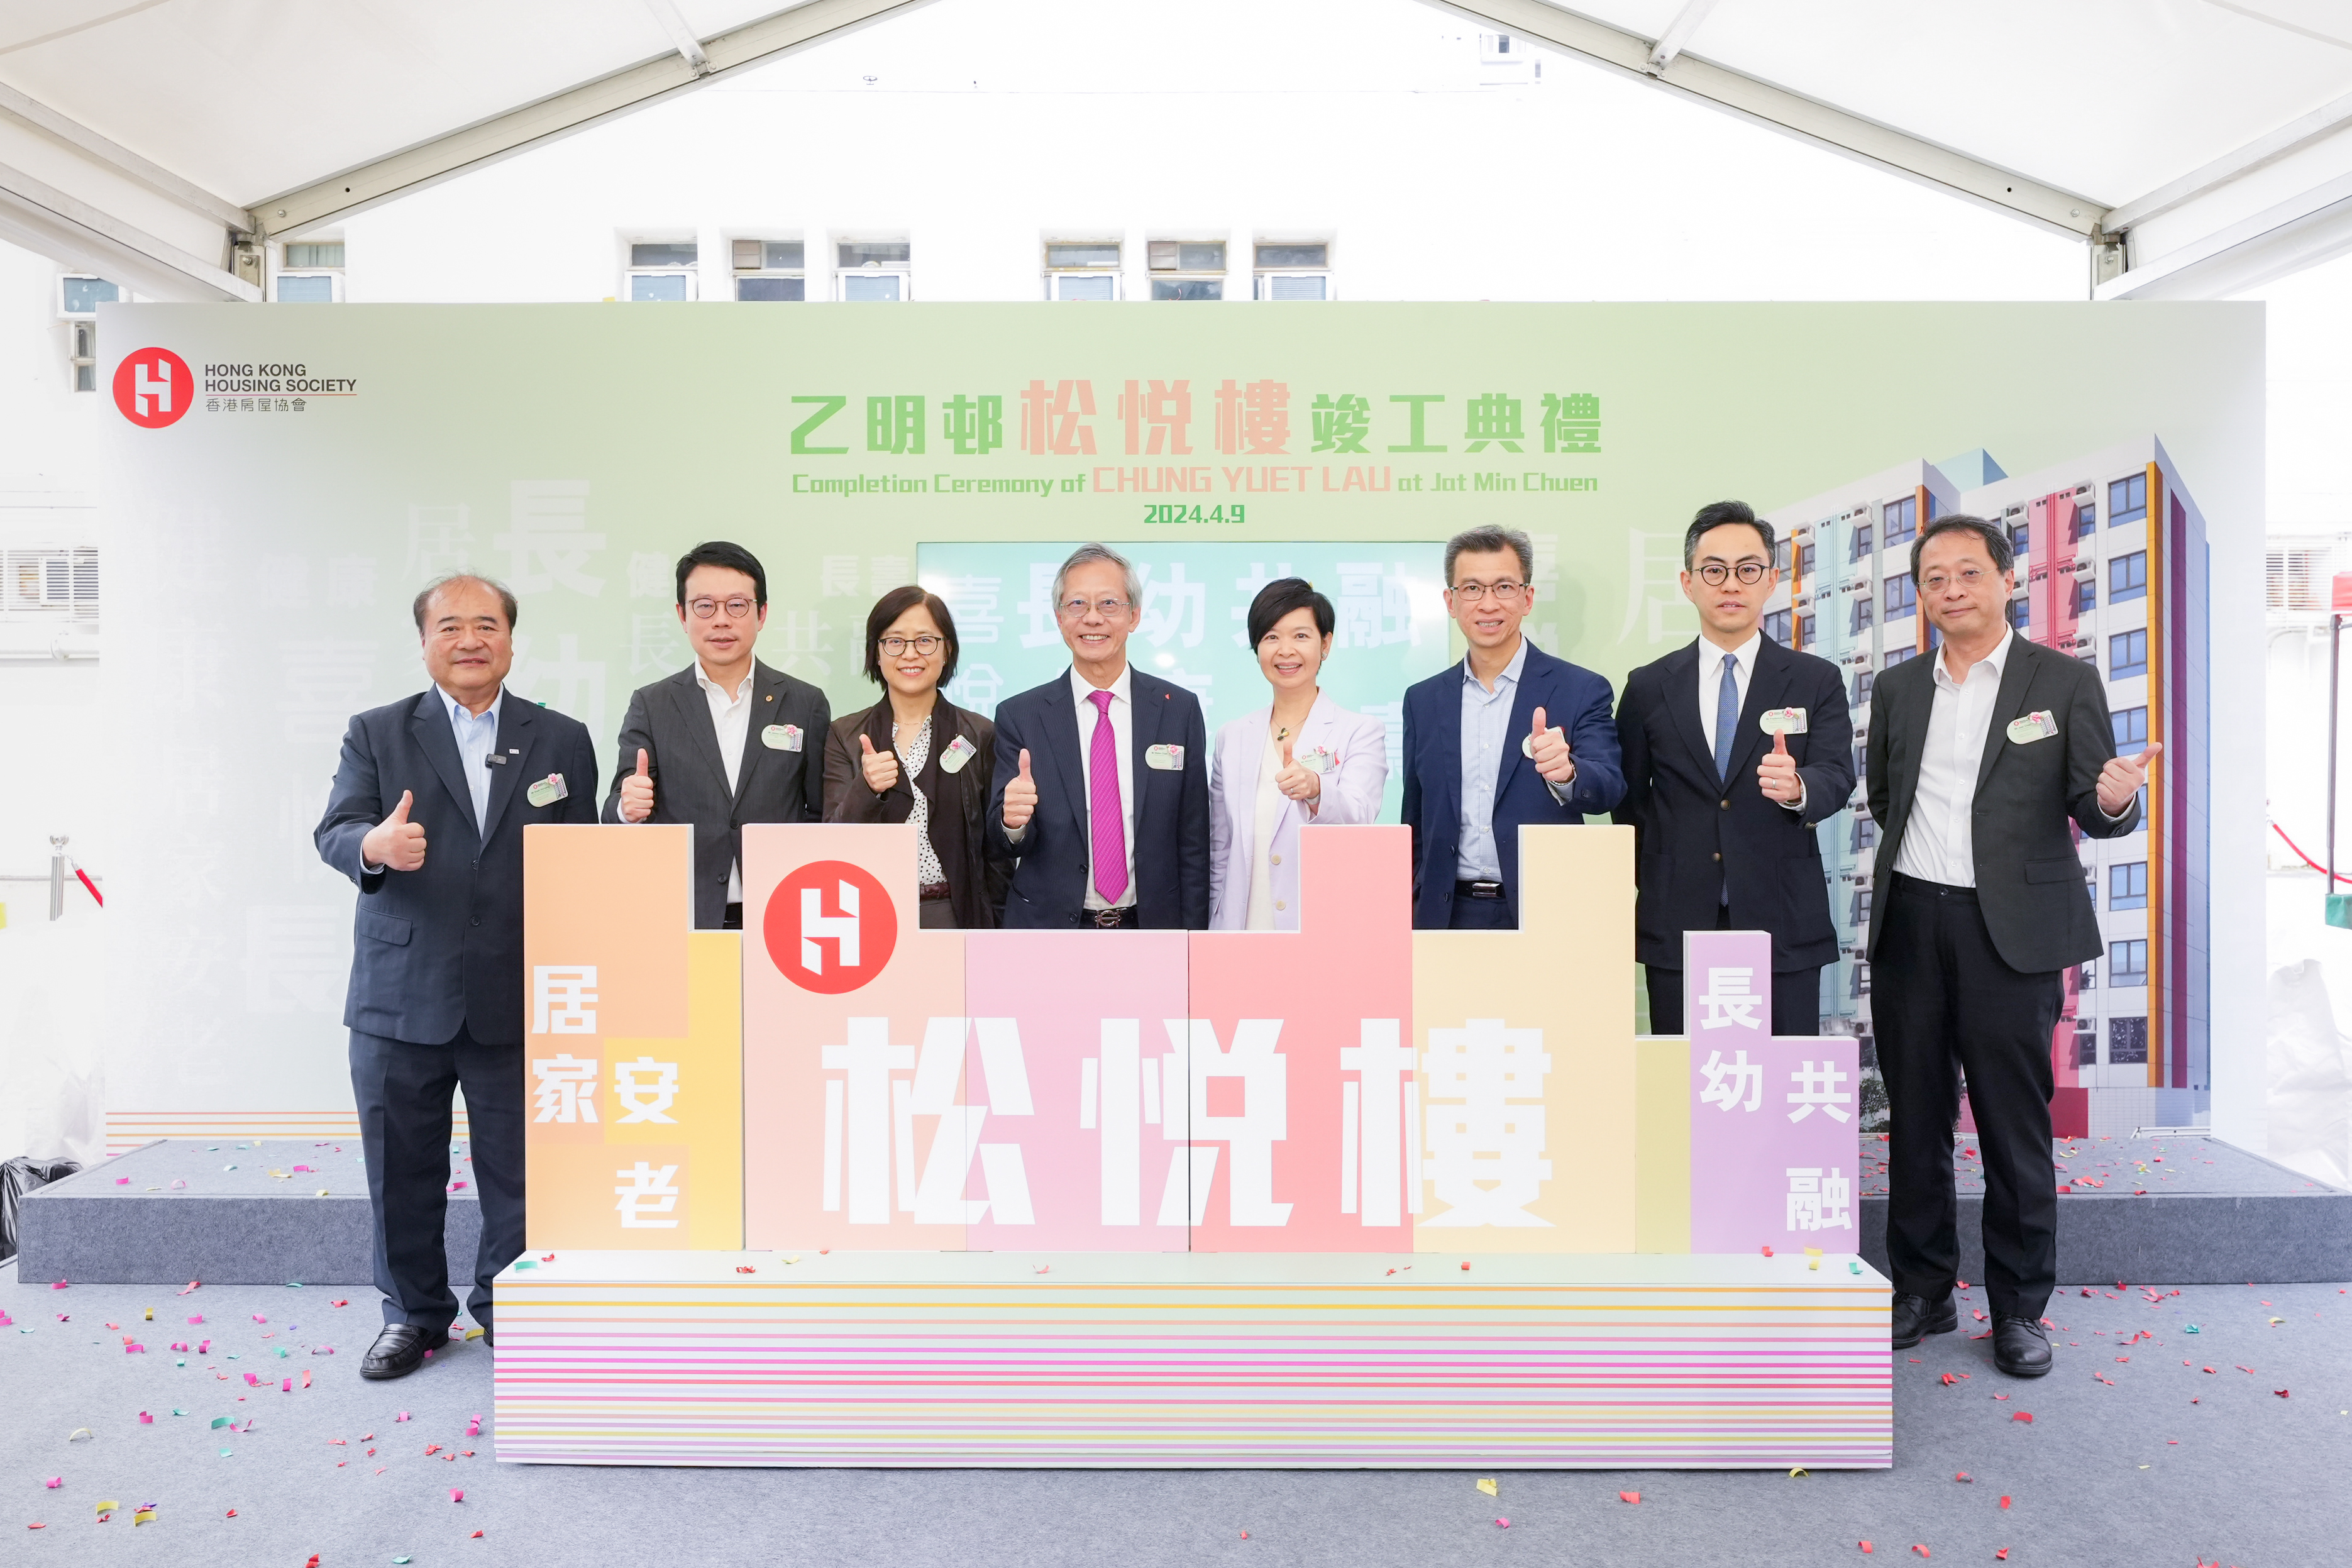 The Hong Kong Housing Society (HKHS) held a completion ceremony for its brand new elderly housing project “Chung Yuet Lau” at Jat Min Chuen in Sha Tin recently.  Among the officiating guests were the Secretary for Housing of HKSAR Government Winnie Ho, HKHS Chairman Walter Chan and Chief Executive Officer James Chan, and District Officer (Sha Tin) Frederick Yu.